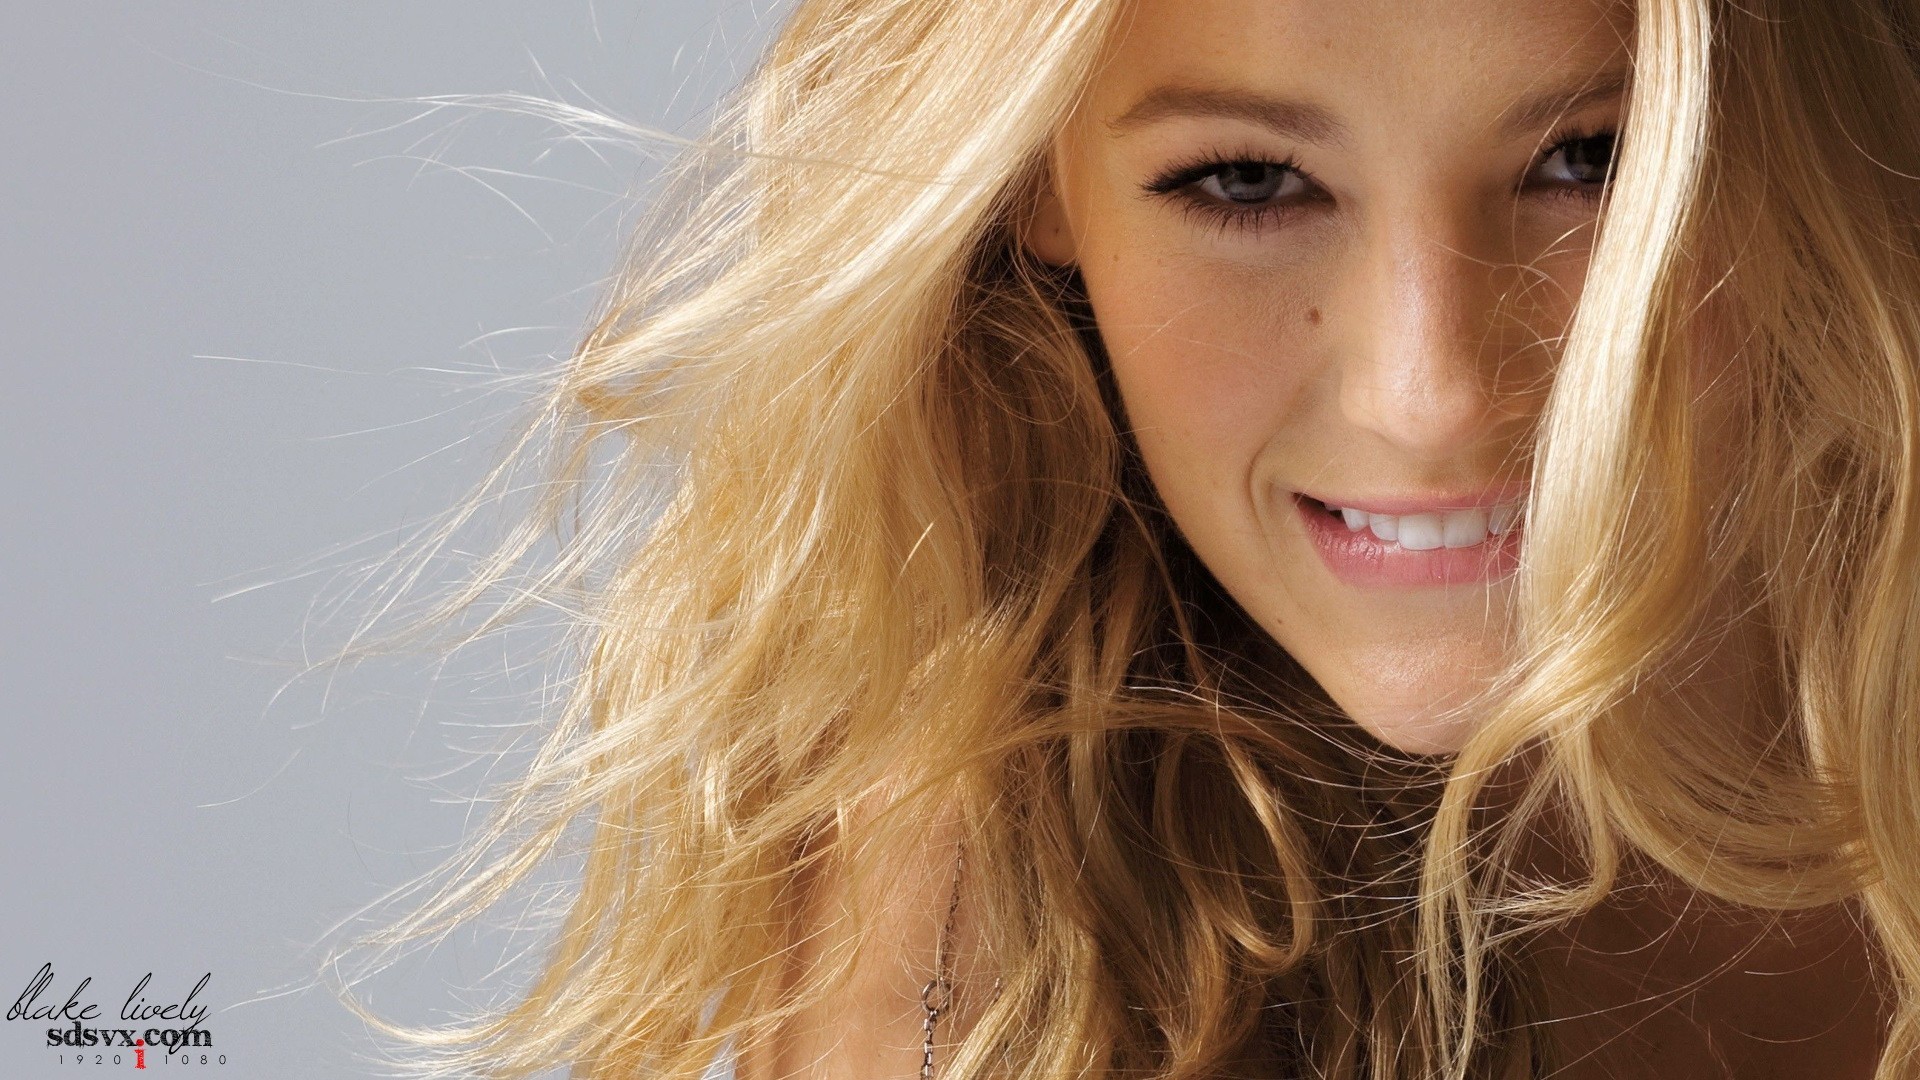 Blake Lively, Blonde, Face, Curly Hair, Biting Lip, Women Wallpapers HD